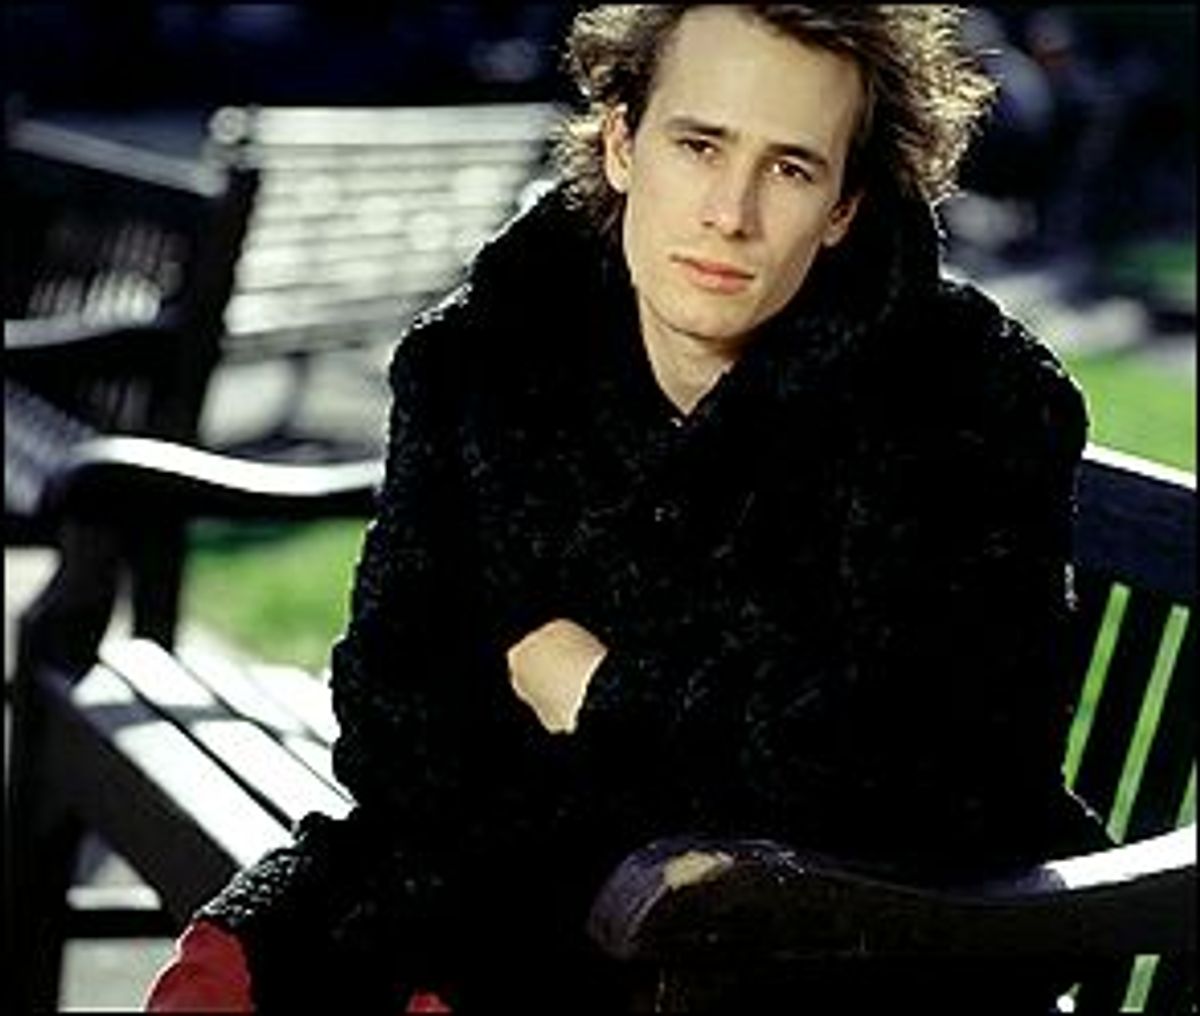 Jeff Buckley: a cult in the making?